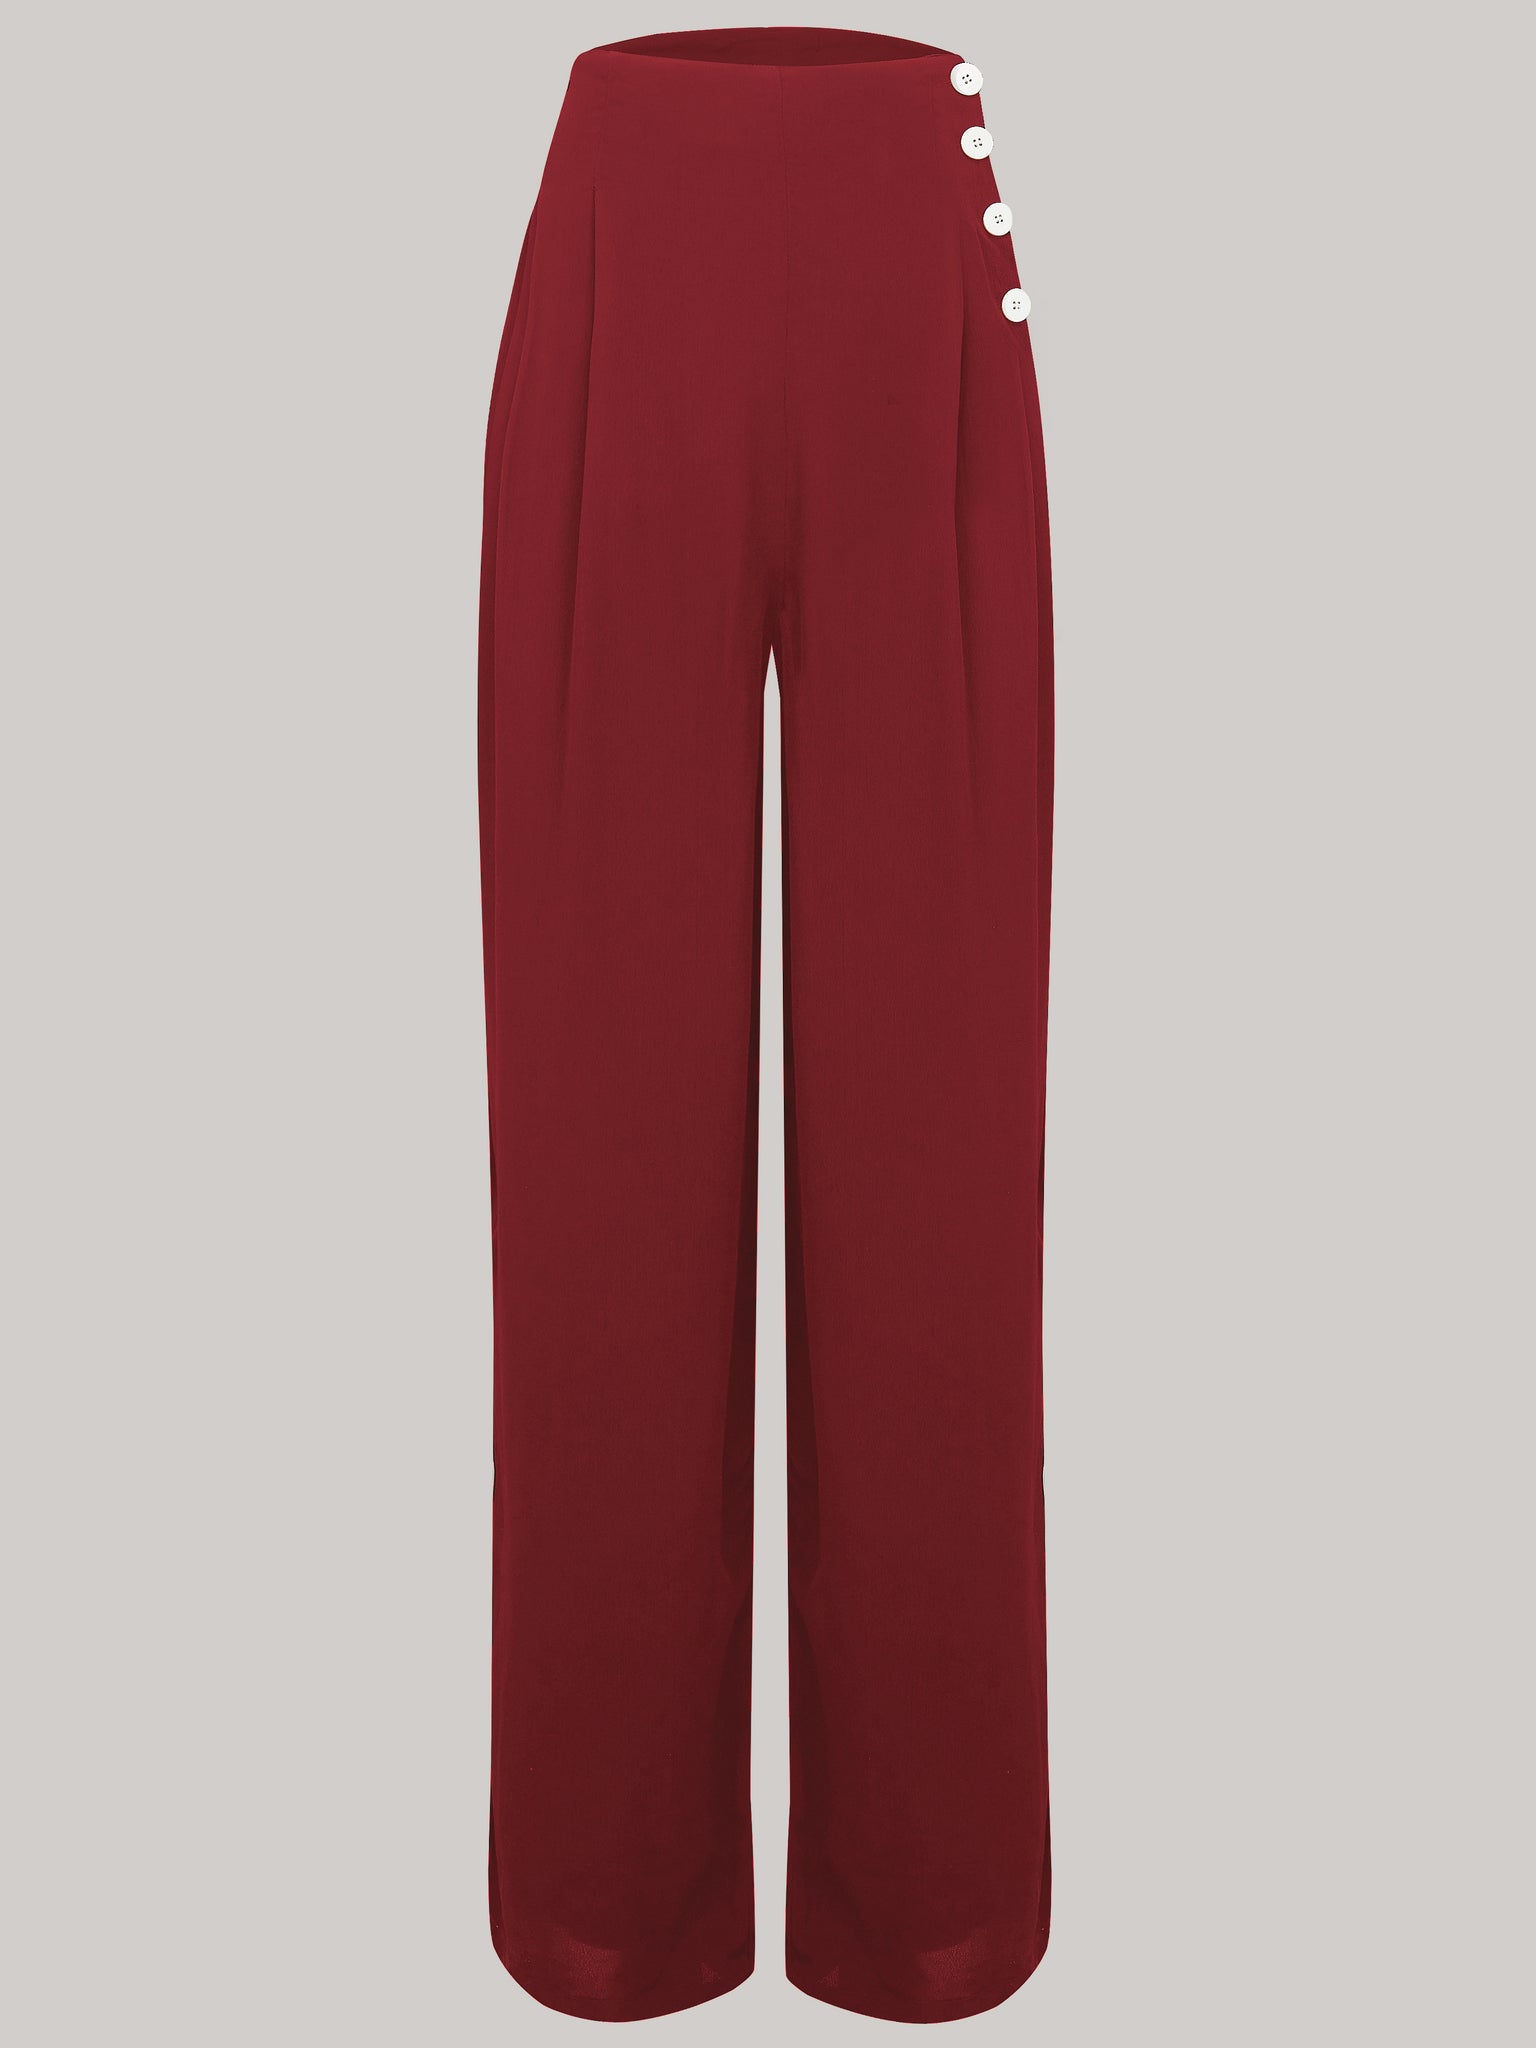 "Audrey" Trousers in Wine, Totally Authentic & Classic 1940s True Vintage Inspired Style - True and authentic vintage style clothing, inspired by the Classic styles of CC41 , WW2 and the fun 1950s RocknRoll era, for everyday wear plus events like Goodwood Revival, Twinwood Festival and Viva Las Vegas Rockabilly Weekend Rock n Romance The Seamstress Of Bloomsbury